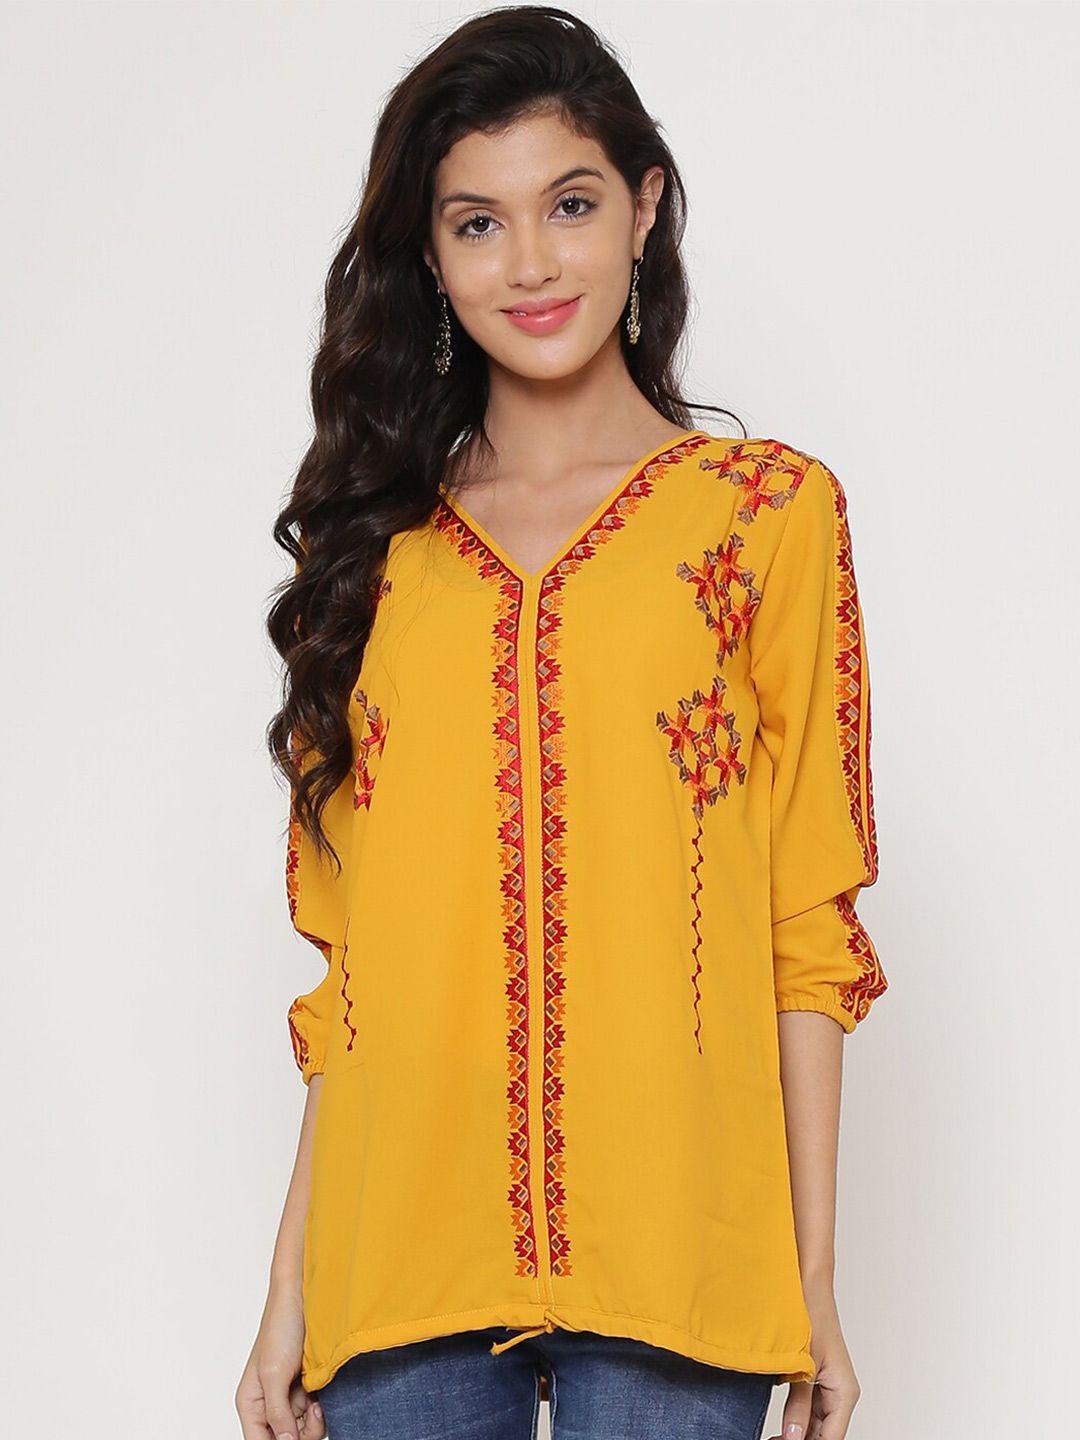 be indi women mustard yellow & red embroidered top